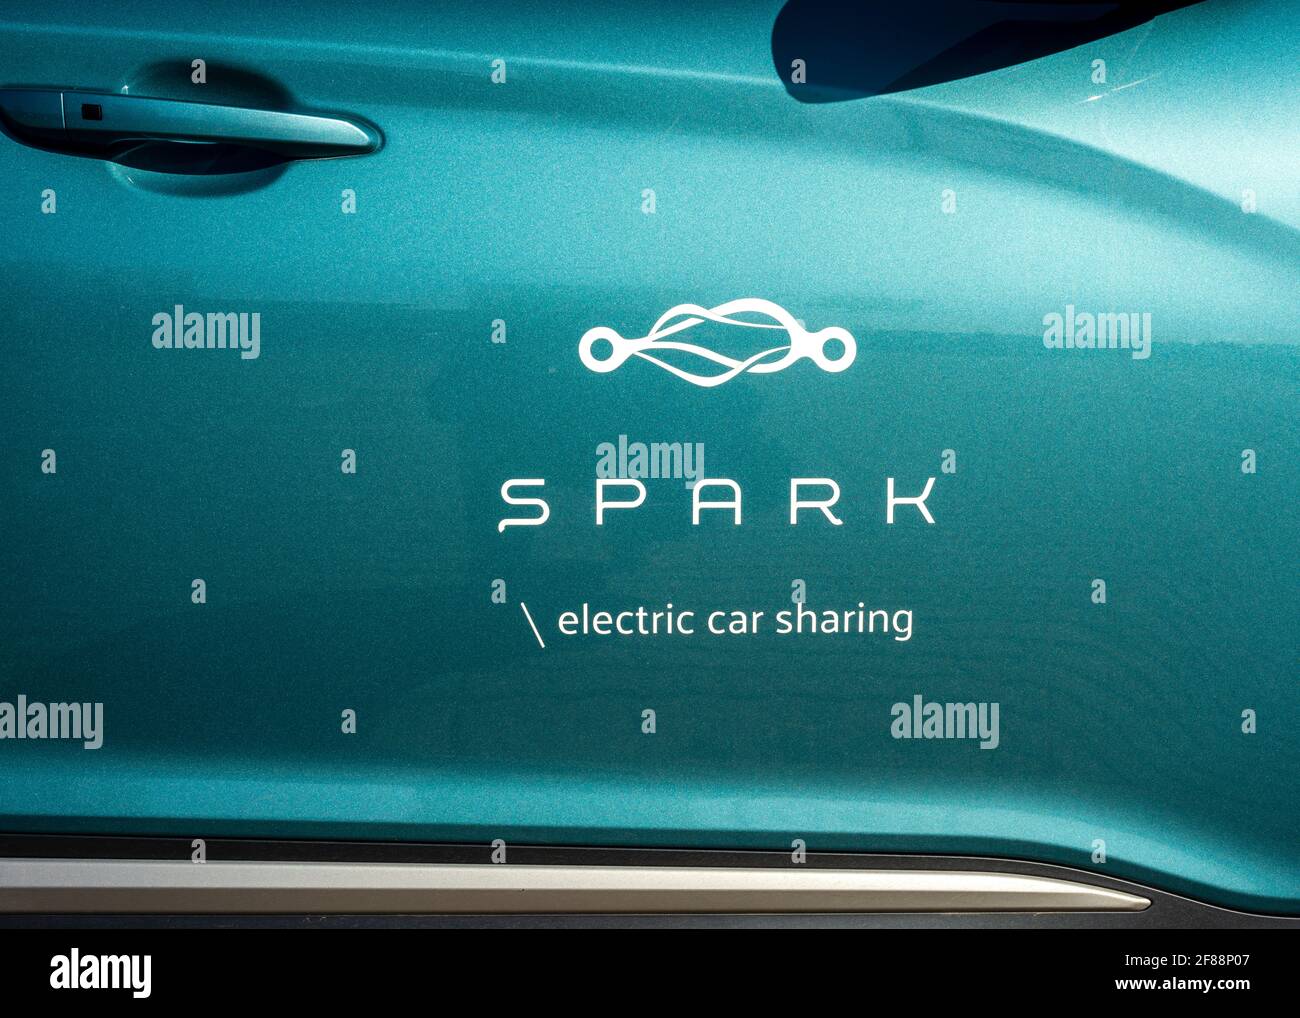 Spark Electric Car Sharing logo and sign on teal coloured car door as the most popular car share scheme in Sofia, Bulgaria, Eastern Europe, EU Stock Photo